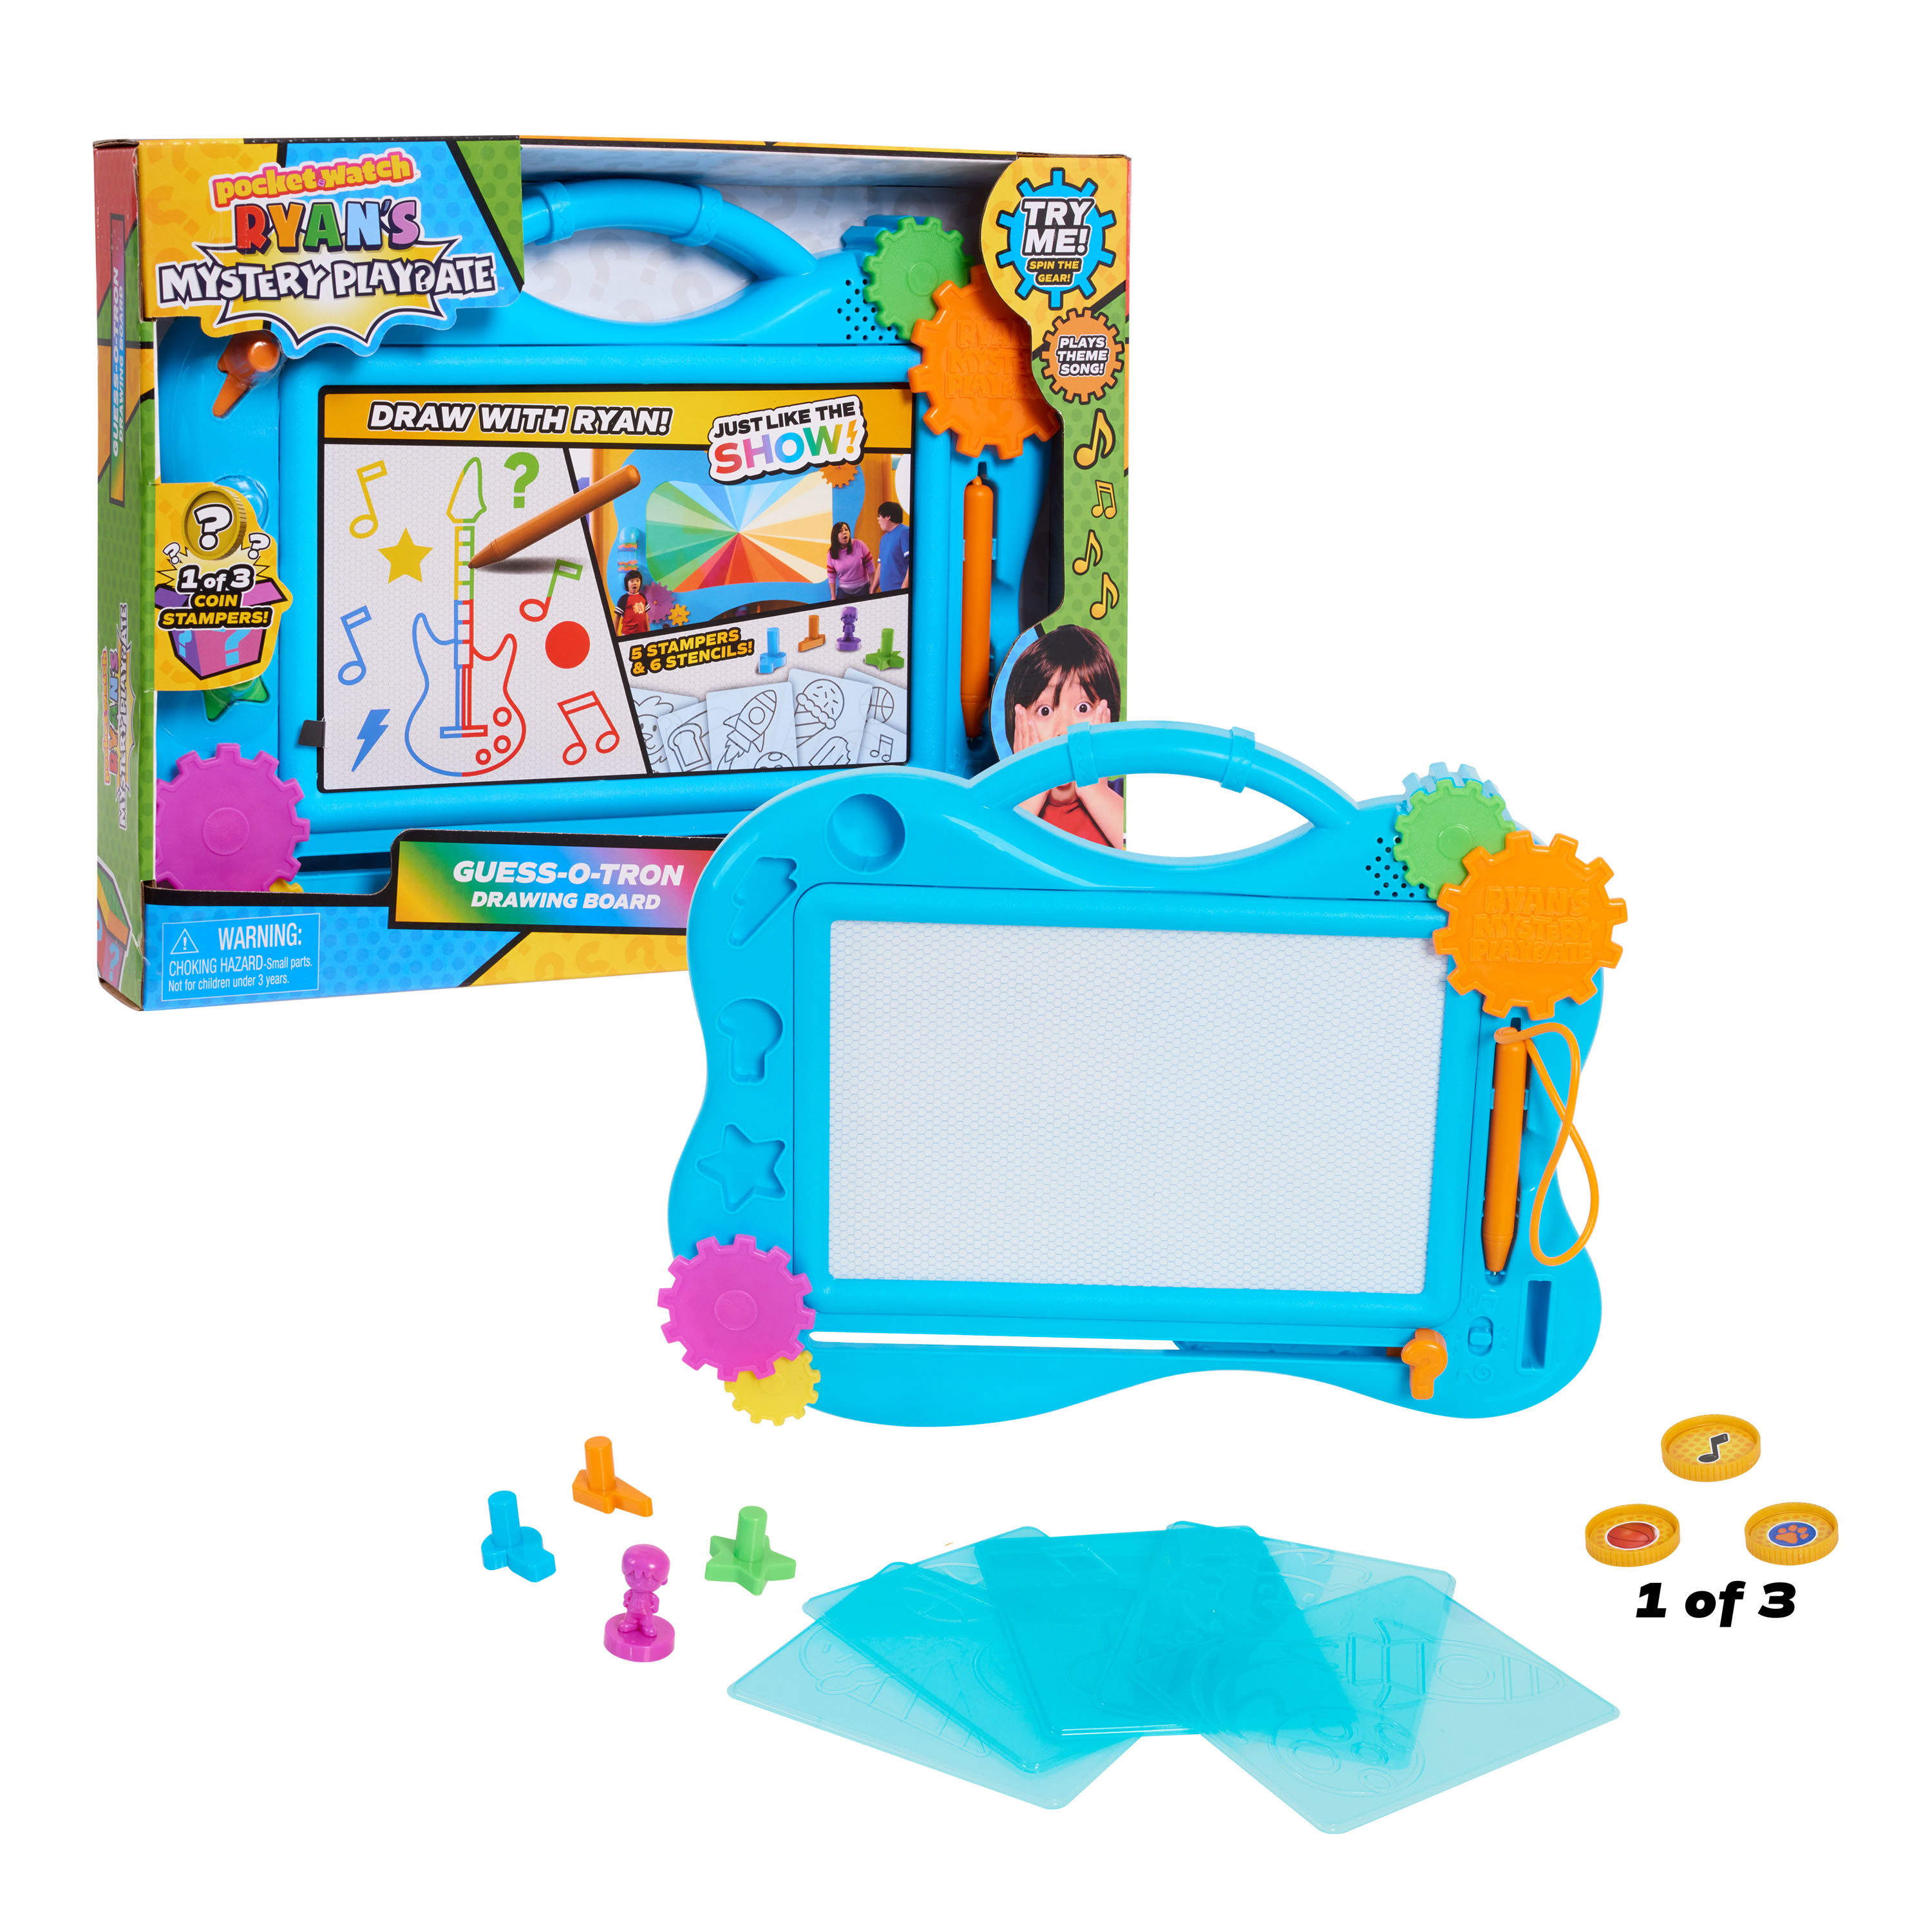 Ryan’s Mystery Playdate Guess-O-Tron Drawing Board,  Kids Toys for Ages 3 Up, Gifts and Presents - image 1 of 3